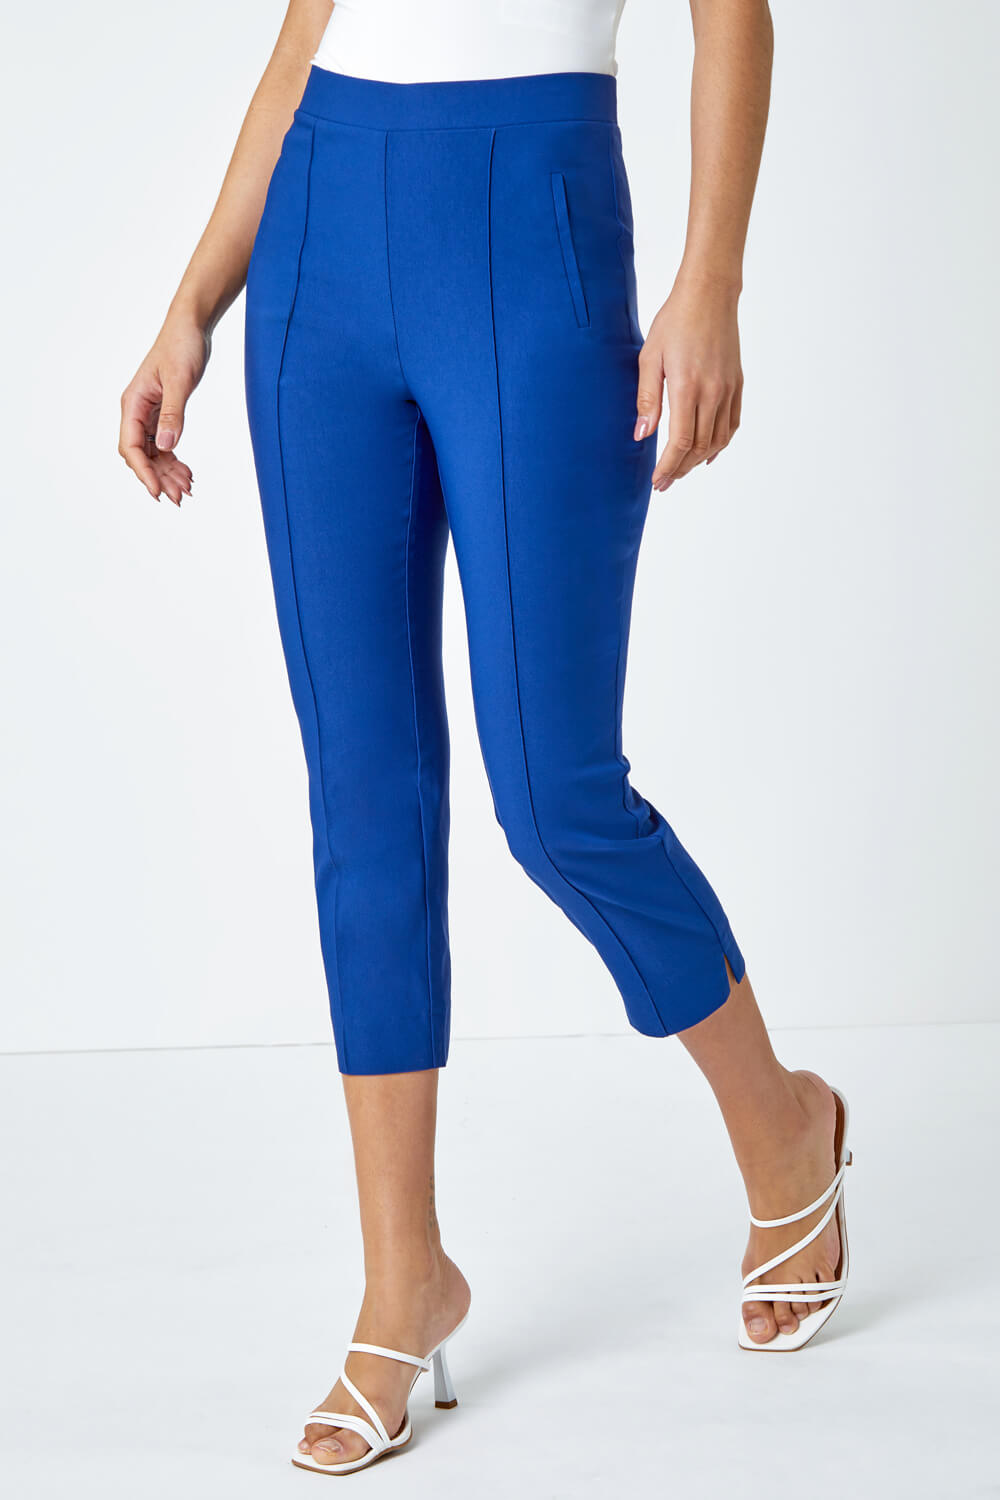 Midnight Blue Seam Detail Stretch Cropped Trousers, Image 4 of 5